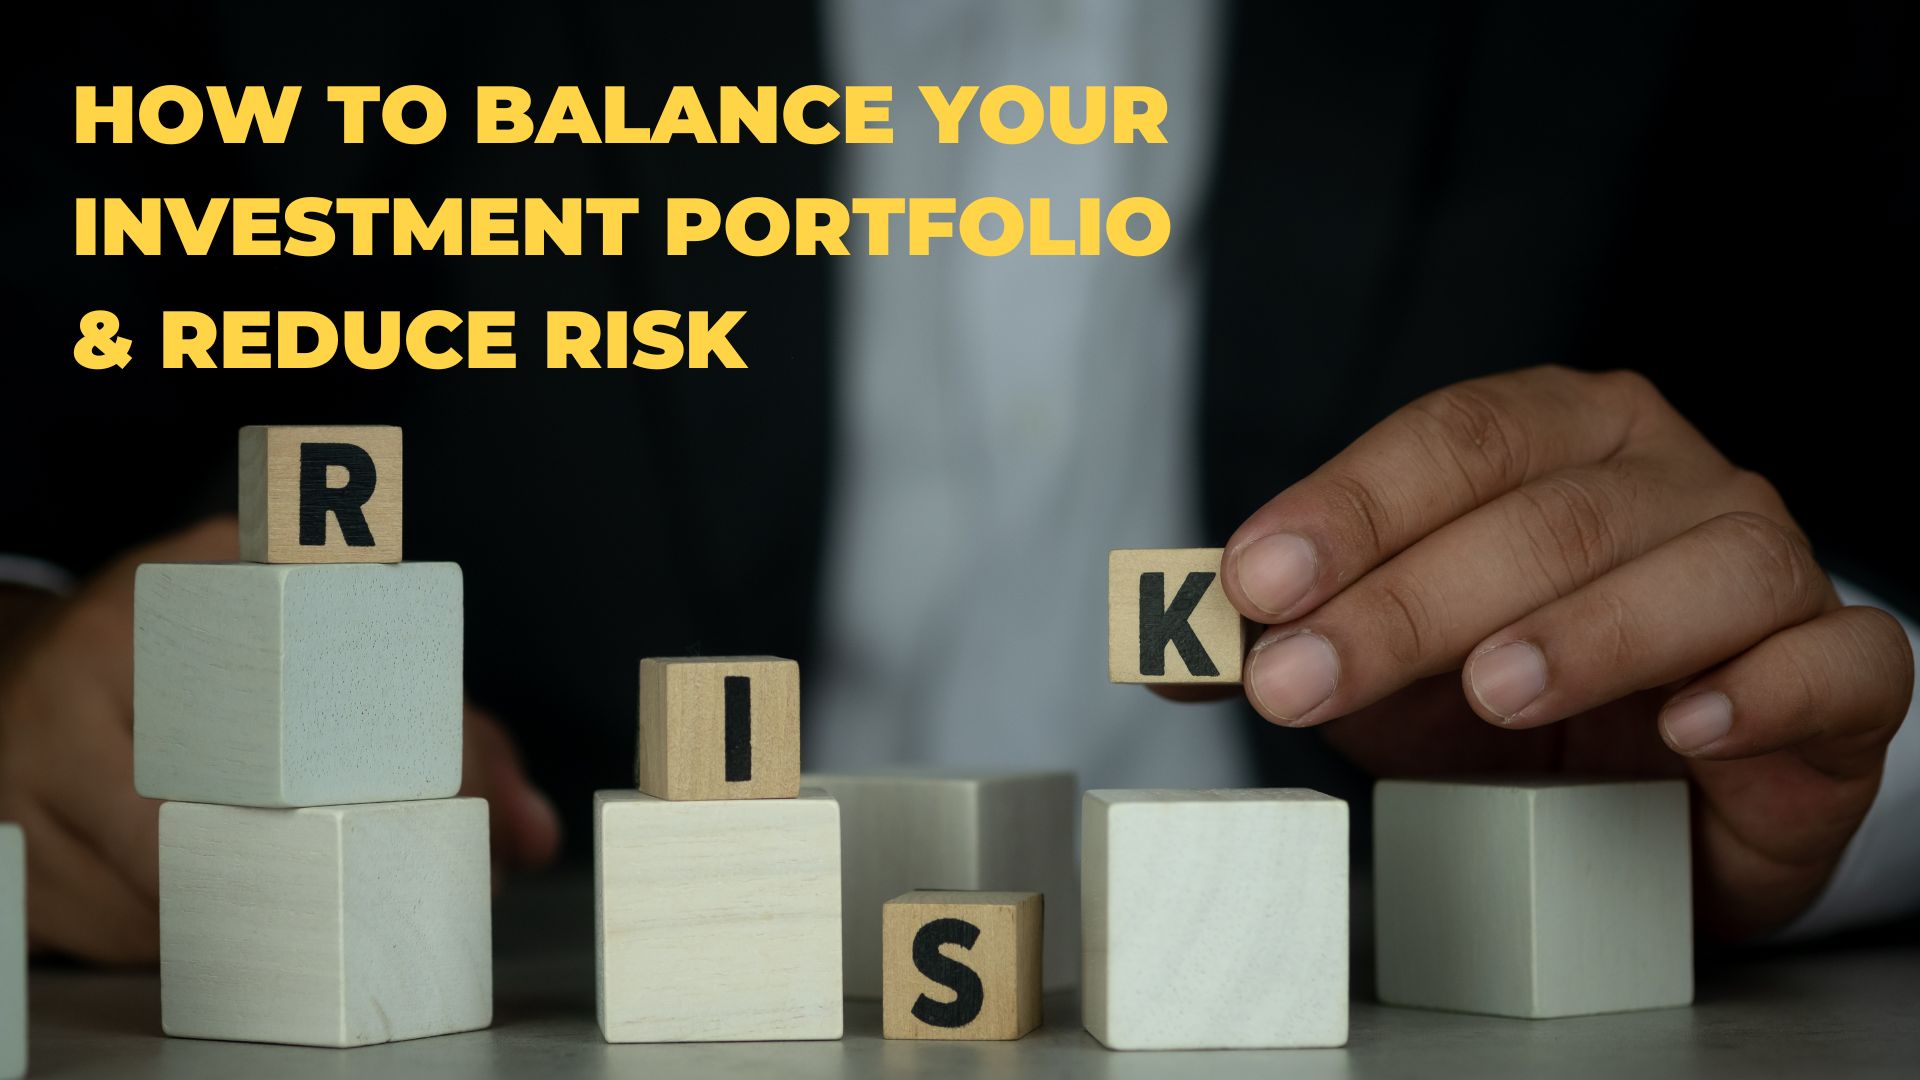 How to Balance Your Investment Portfolio & Reduce Risk